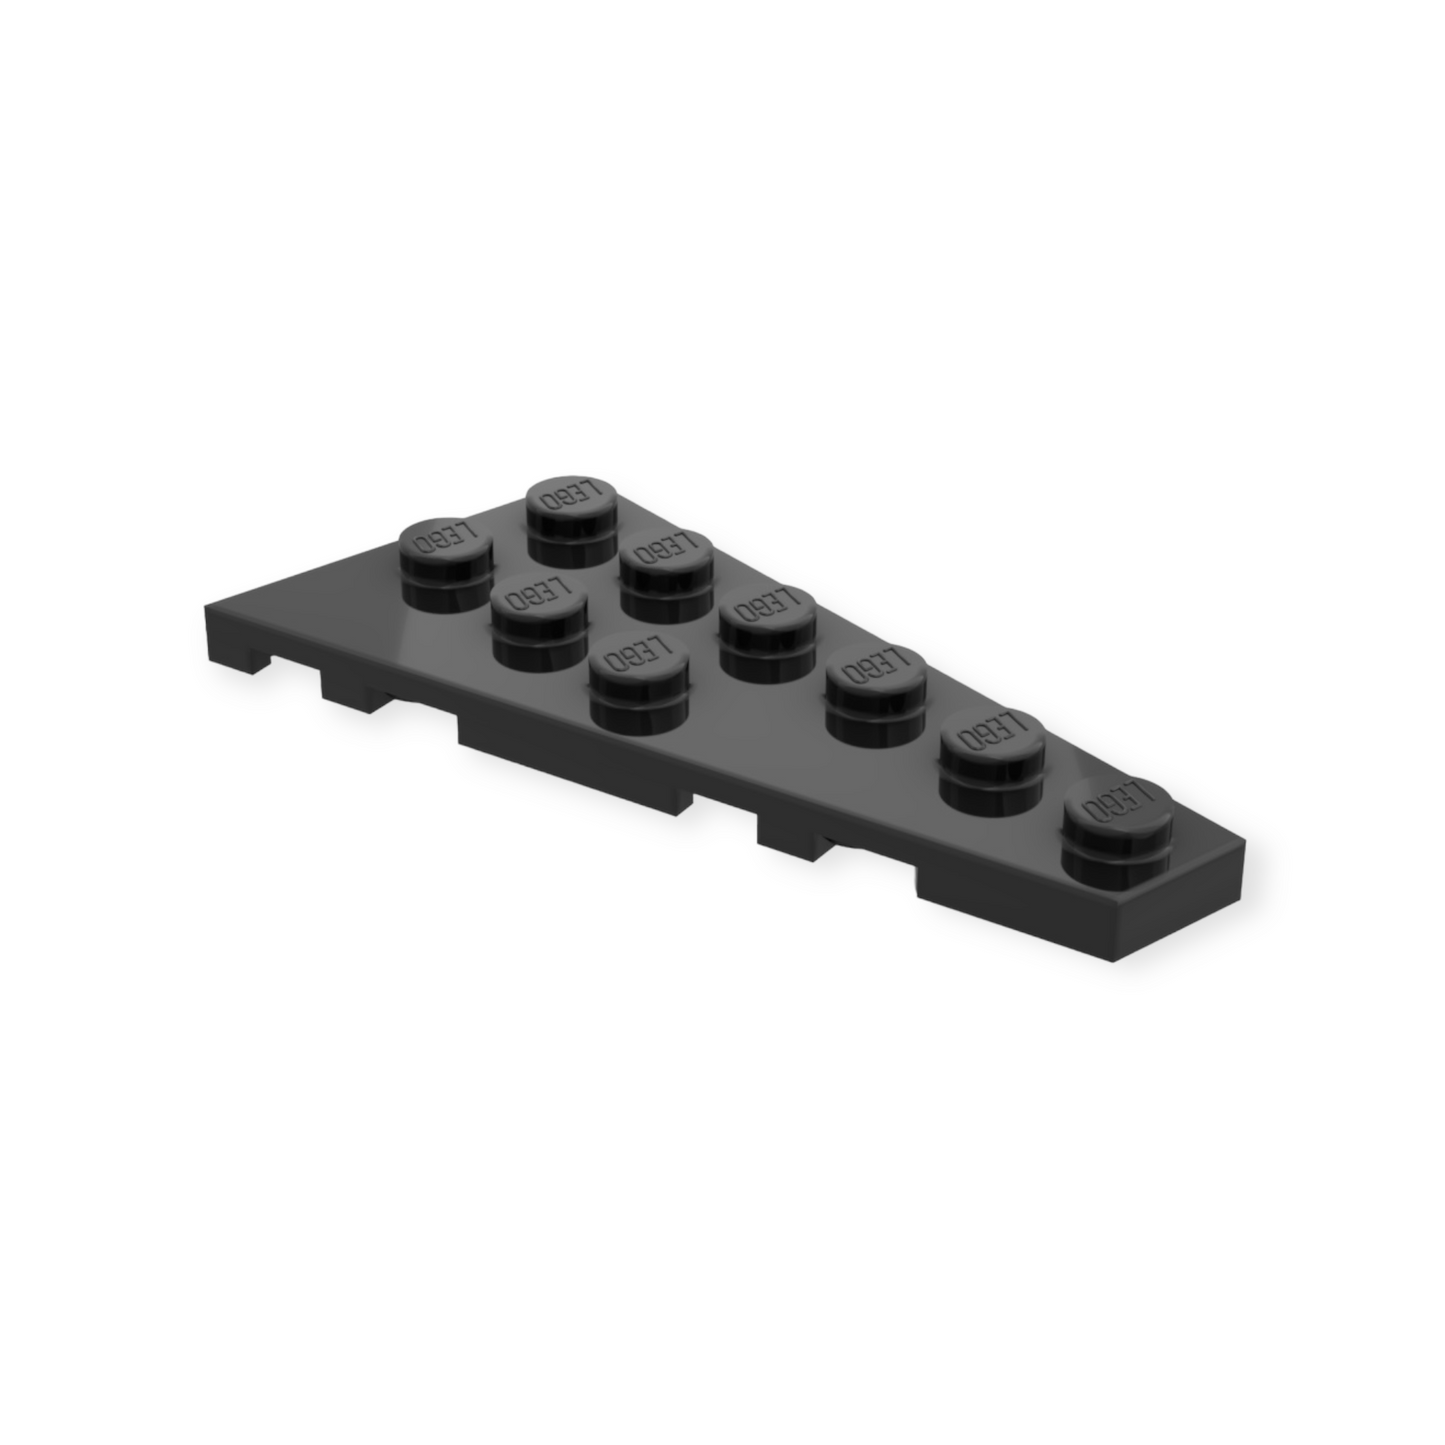 LEGO Wedge Plate 6x3 Rechts - in Black